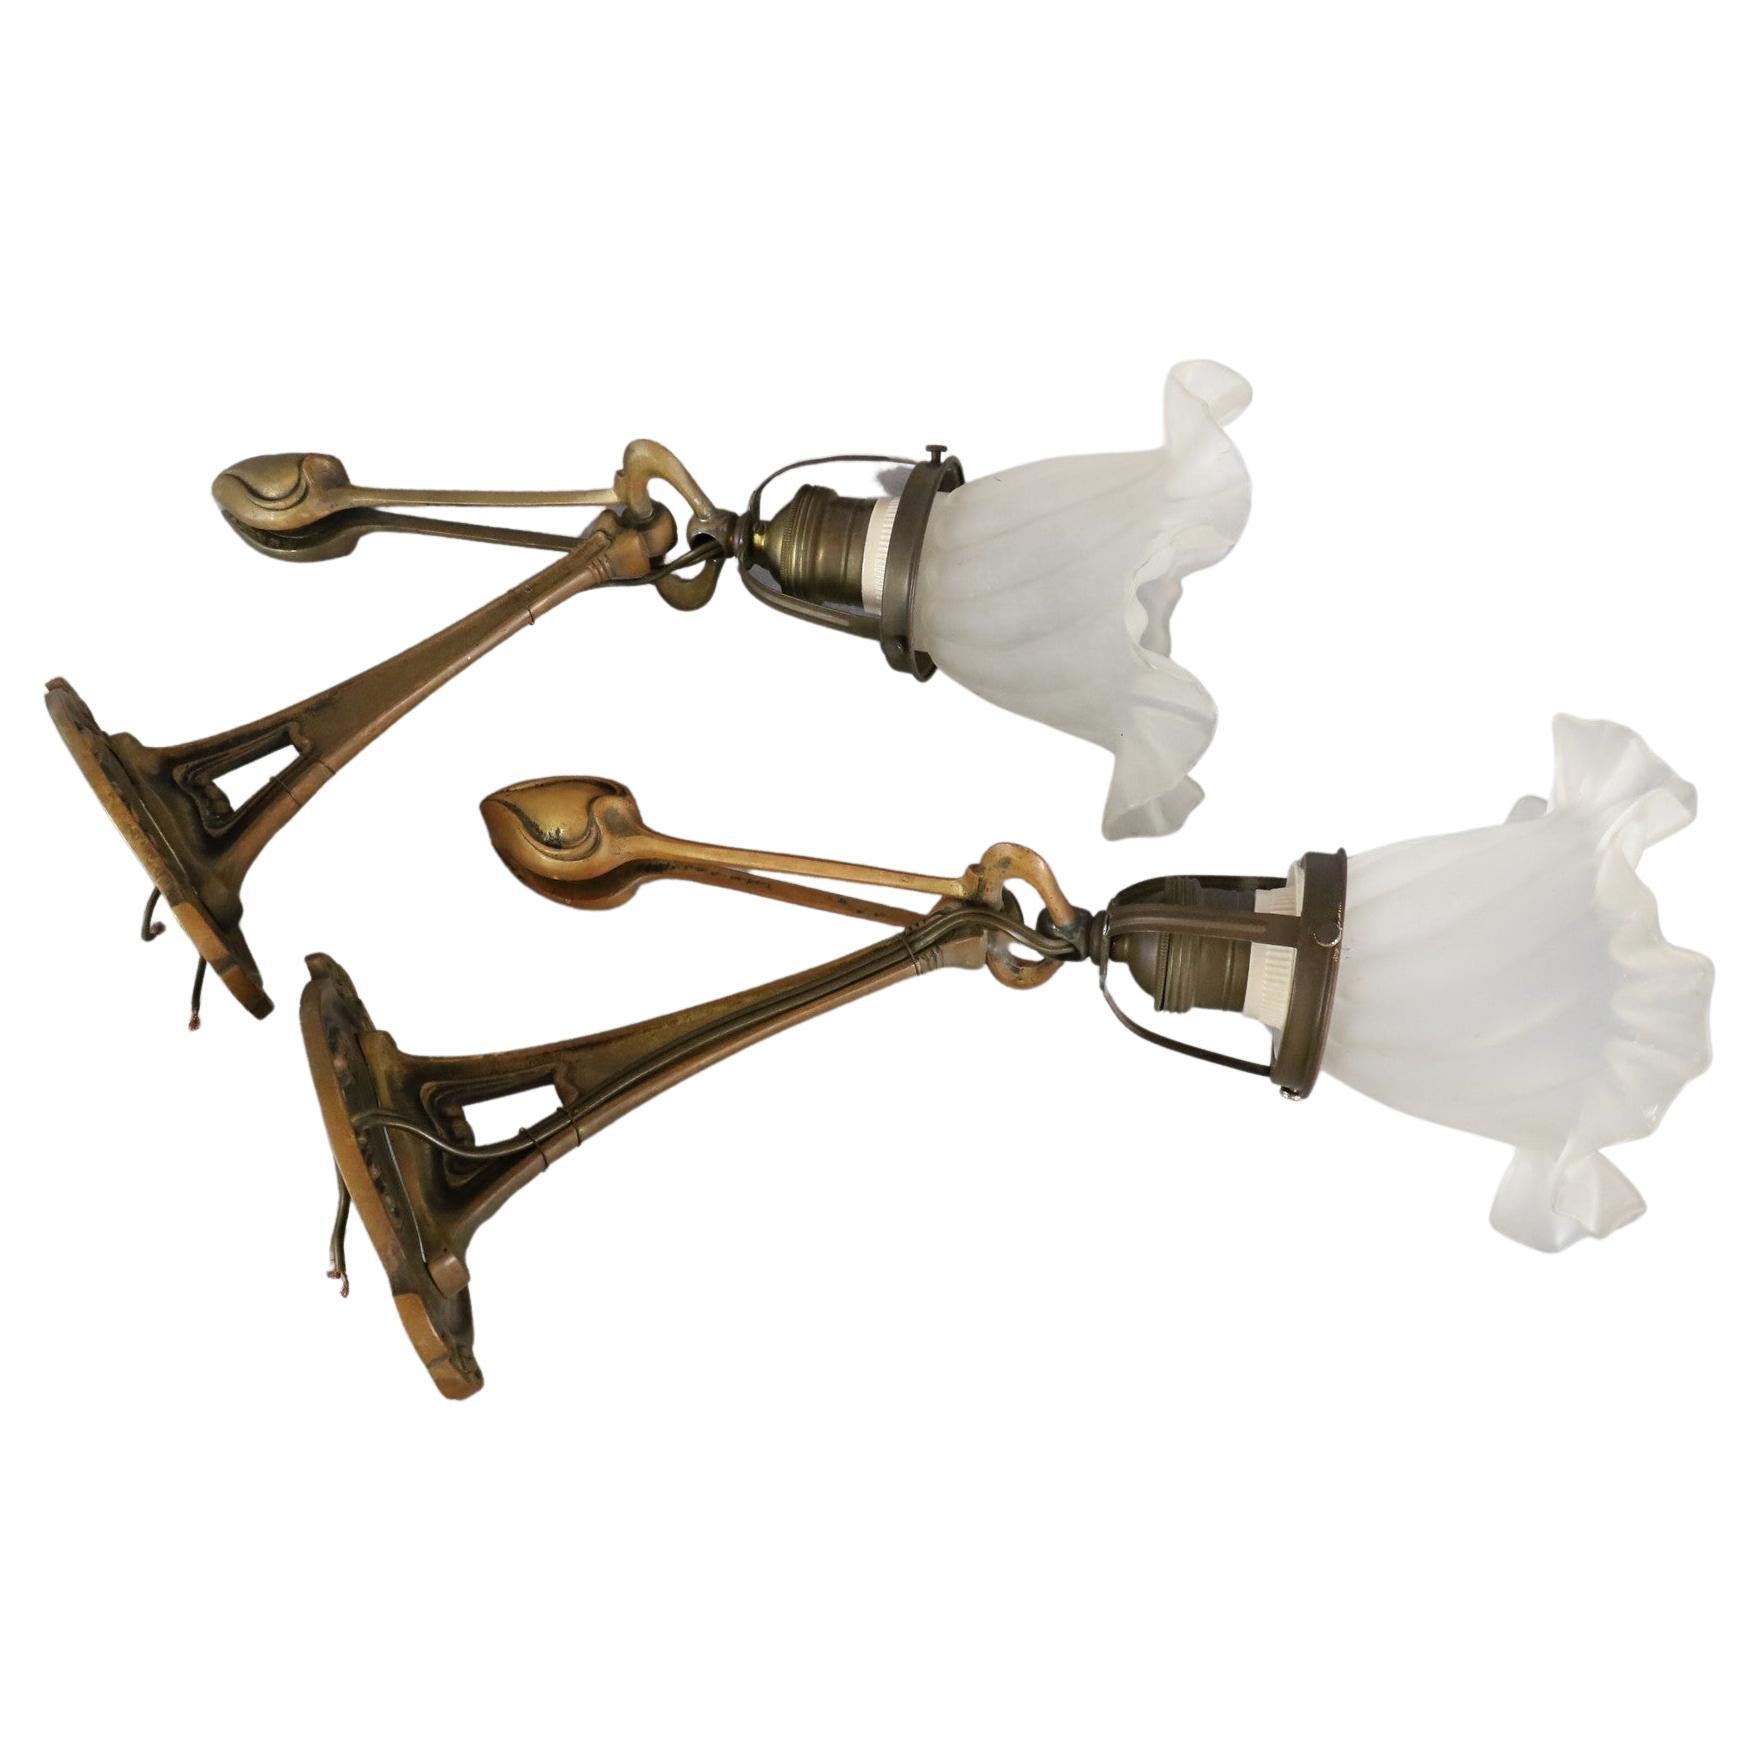 Pair of Art Nouveau Wall Lamps in the style of Hector Guimard France

Beautiful pair of wall sconces in bronze and opaline of Art Nouveau style. They are characteristic of the style of the time. We recognize the patterns, the delicate and rounded